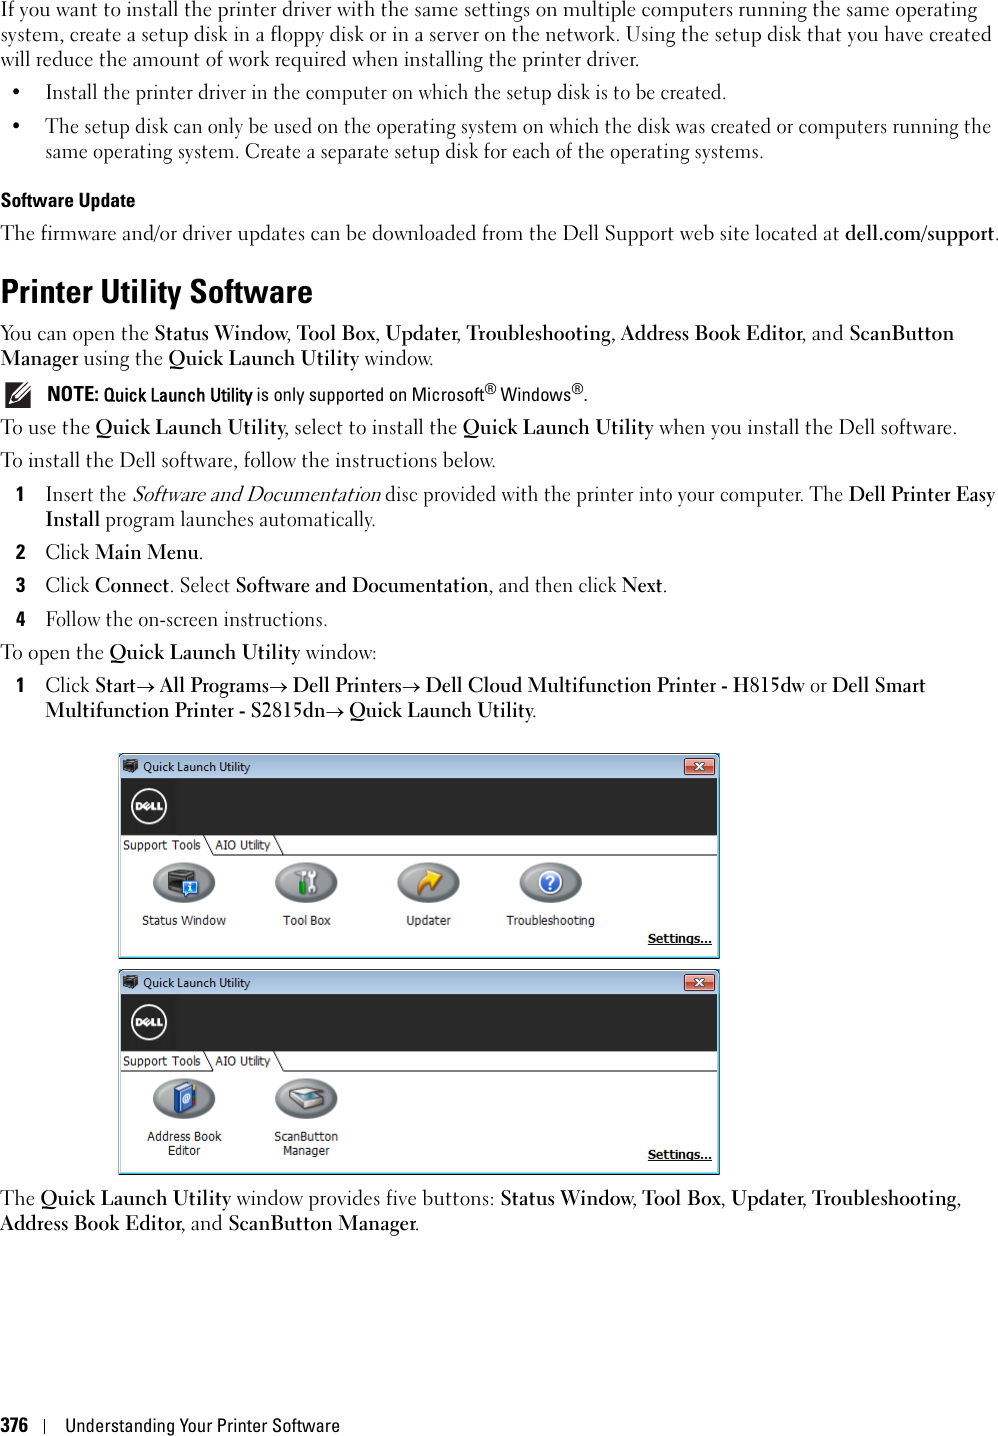 376Understanding Your Printer SoftwareIf you want to install the printer driver with the same settings on multiple computers running the same operating system, create a setup disk in a floppy disk or in a server on the network. Using the setup disk that you have created will reduce the amount of work required when installing the printer driver.• Install the printer driver in the computer on which the setup disk is to be created.• The setup disk can only be used on the operating system on which the disk was created or computers running the same operating system. Create a separate setup disk for each of the operating systems.Software UpdateThe firmware and/or driver updates can be downloaded from the Dell Support web site located at dell.com/support.Printer Utility SoftwareYou can open the Status Window, Tool Box, Updater, Troubleshooting, Address Book Editor, and ScanButton Manager using the Quick Launch Utility window. NOTE: Quick Launch Utility is only supported on Microsoft® Windows®.To use the Quick Launch Utility, select to install the Quick Launch Utility when you install the Dell software.To install the Dell software, follow the instructions below.1Insert the Software and Documentation disc provided with the printer into your computer. The Dell Printer Easy Install program launches automatically.2Click Main Menu.3Click Connect. Select Software and Documentation, and then click Next.4Follow the on-screen instructions.To open the Quick Launch Utility window:1Click Start All Programs Dell Printers Dell Cloud Multifunction Printer - H815dw or Dell Smart Multifunction Printer - S2815dn Quick Launch Utility.The Quick Launch Utility window provides five buttons: Status Window, Tool Box, Updater, Troubleshooting, Address Book Editor, and ScanButton Manager.